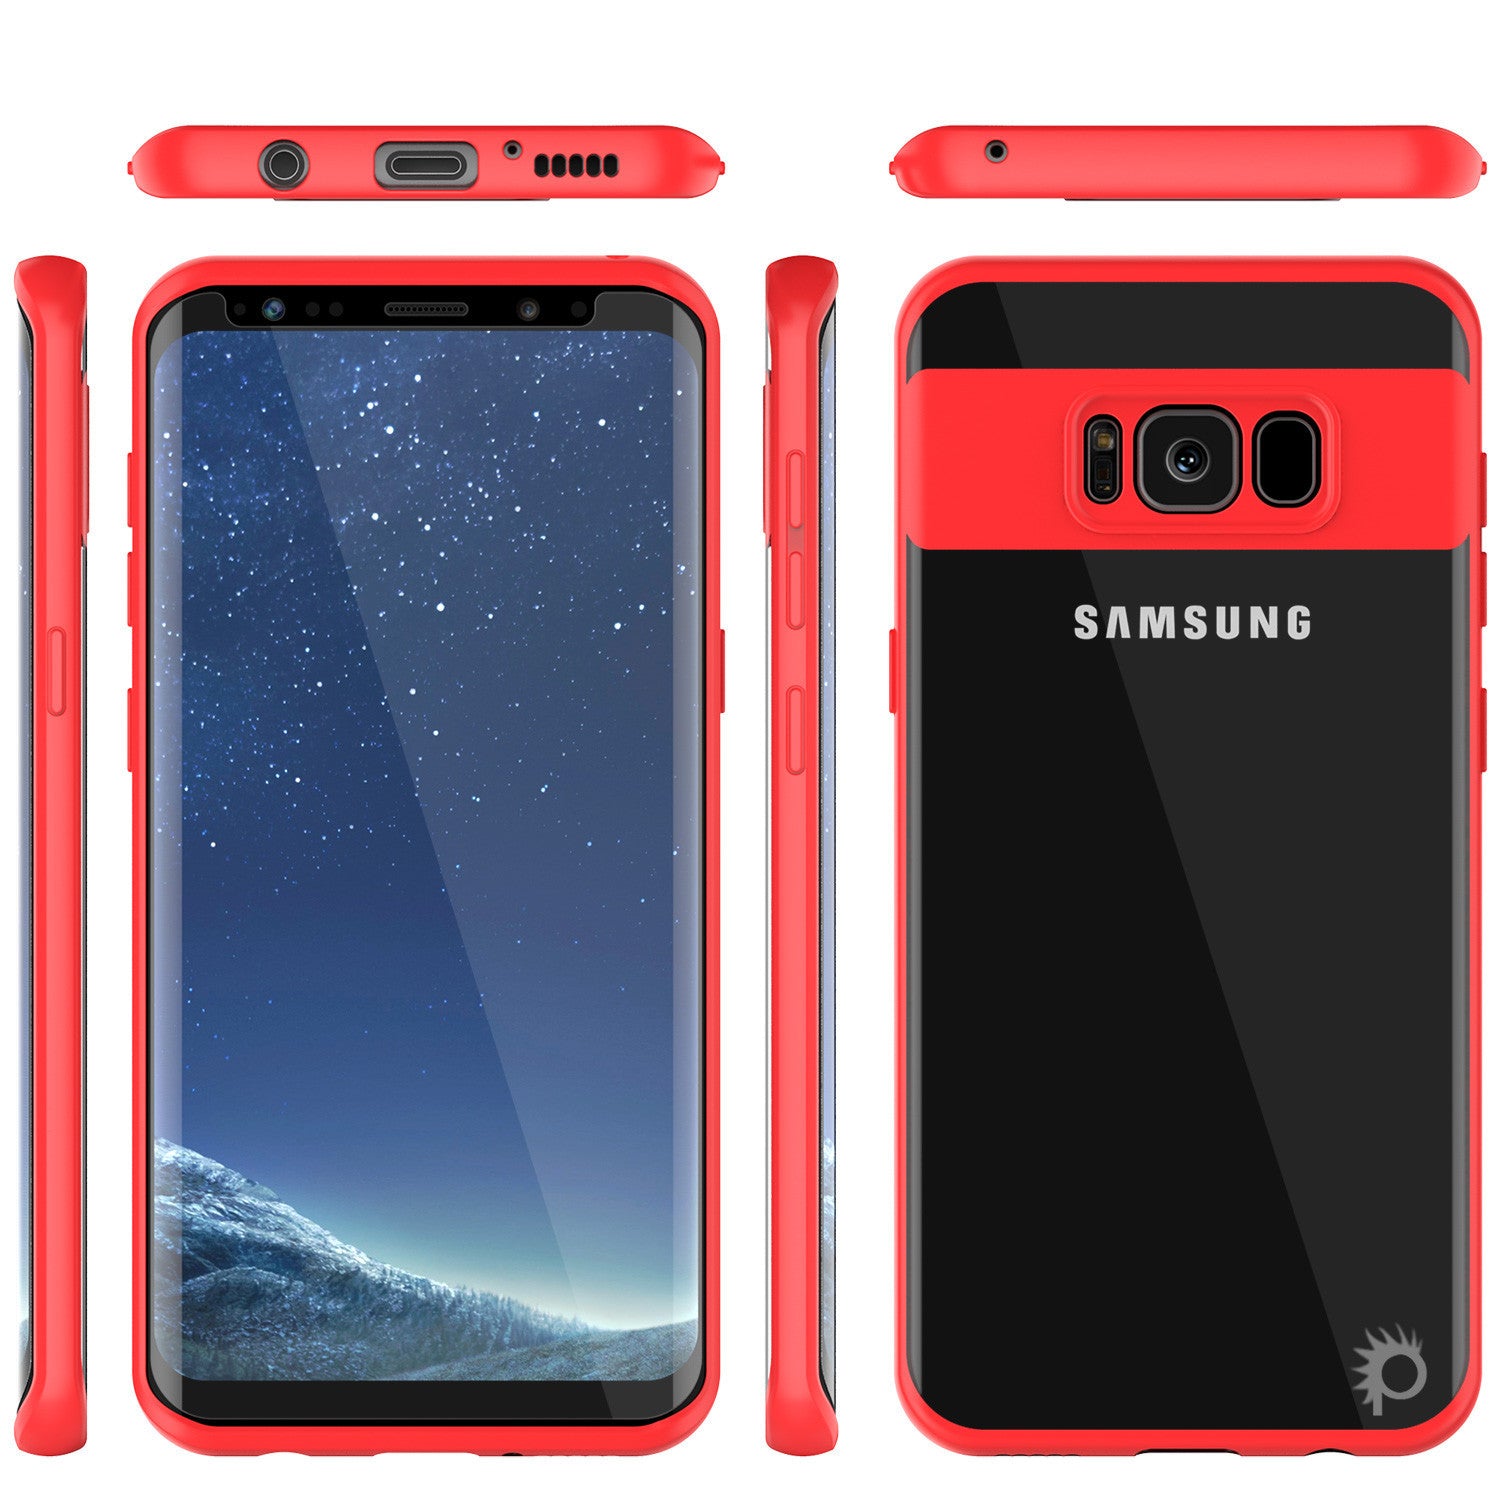 Galaxy S8 Plus Case, Punkcase [MASK Series] [RED] Full Body Hybrid Dual Layer TPU Cover W/ Protective PUNKSHIELD Screen Protector